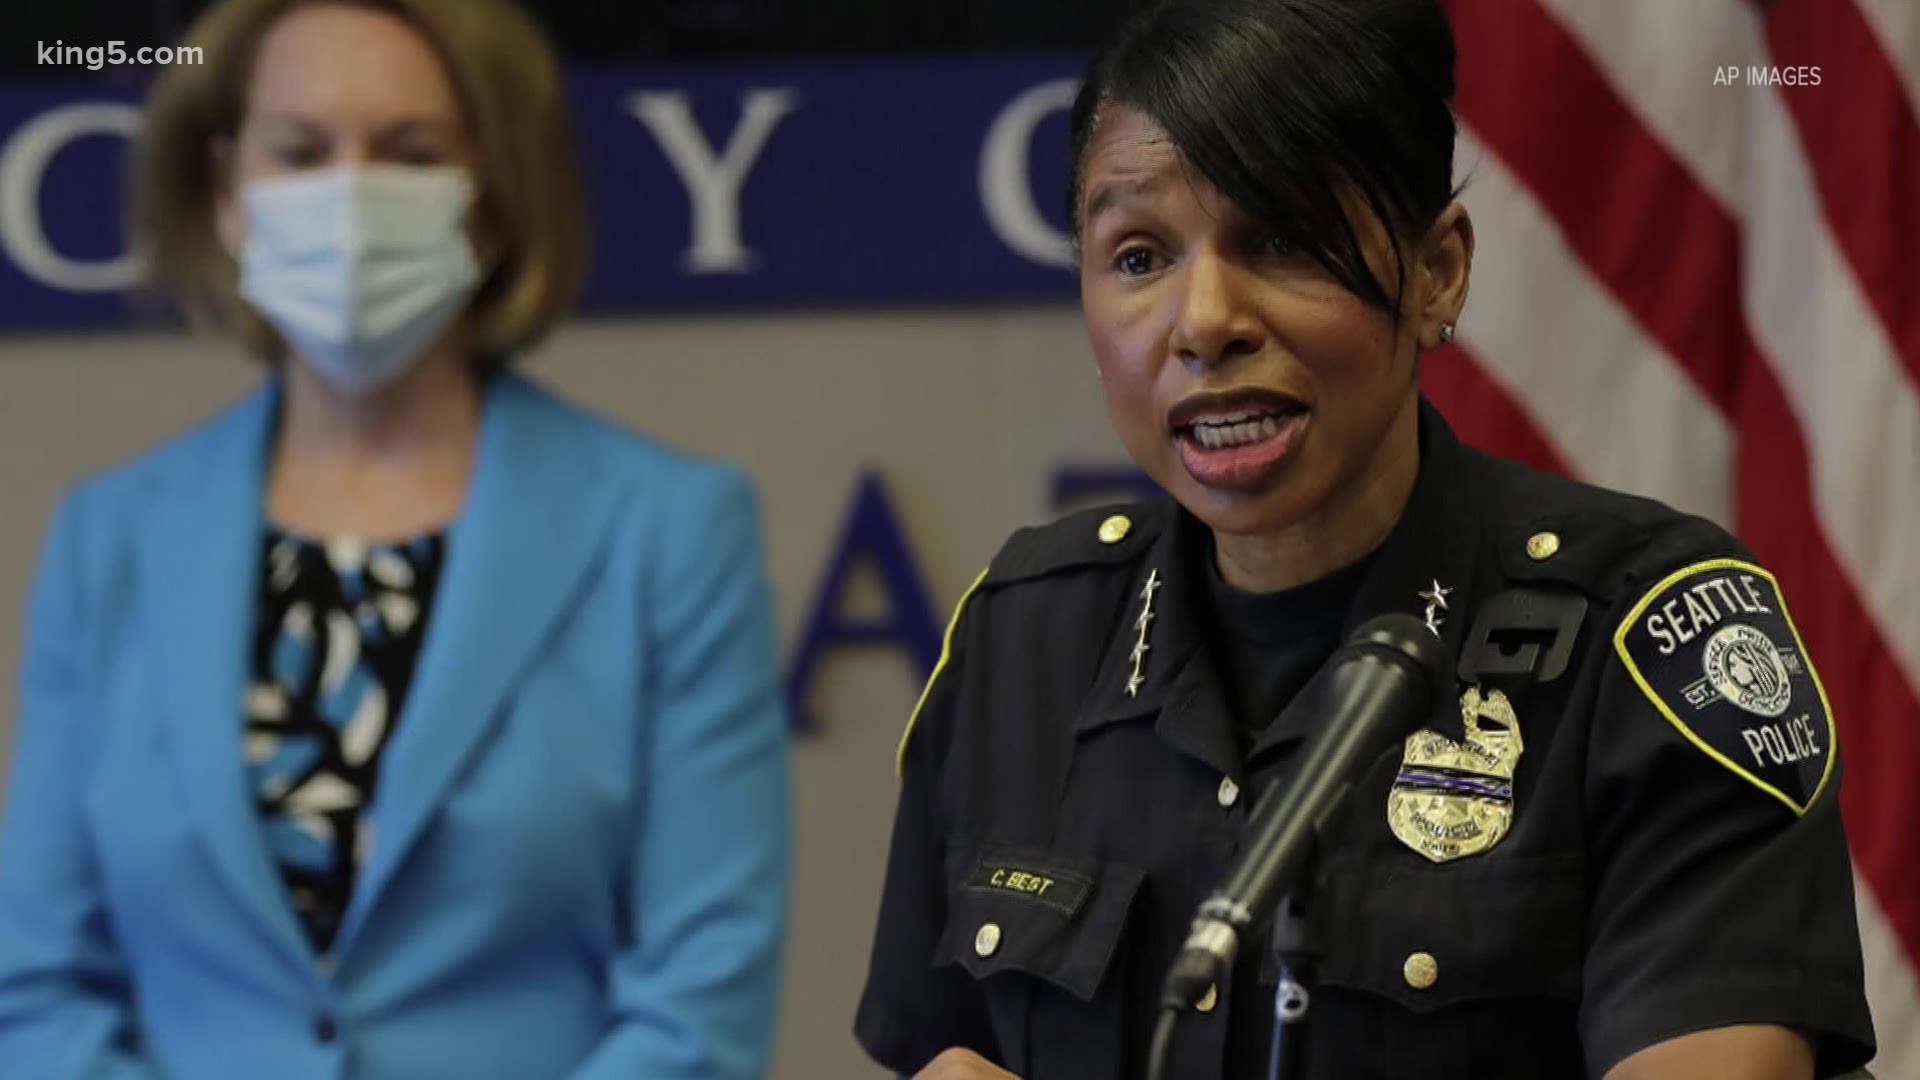 KING 5 has just confirmed that Seattle police chief Carmen Best has intentions of resigning.